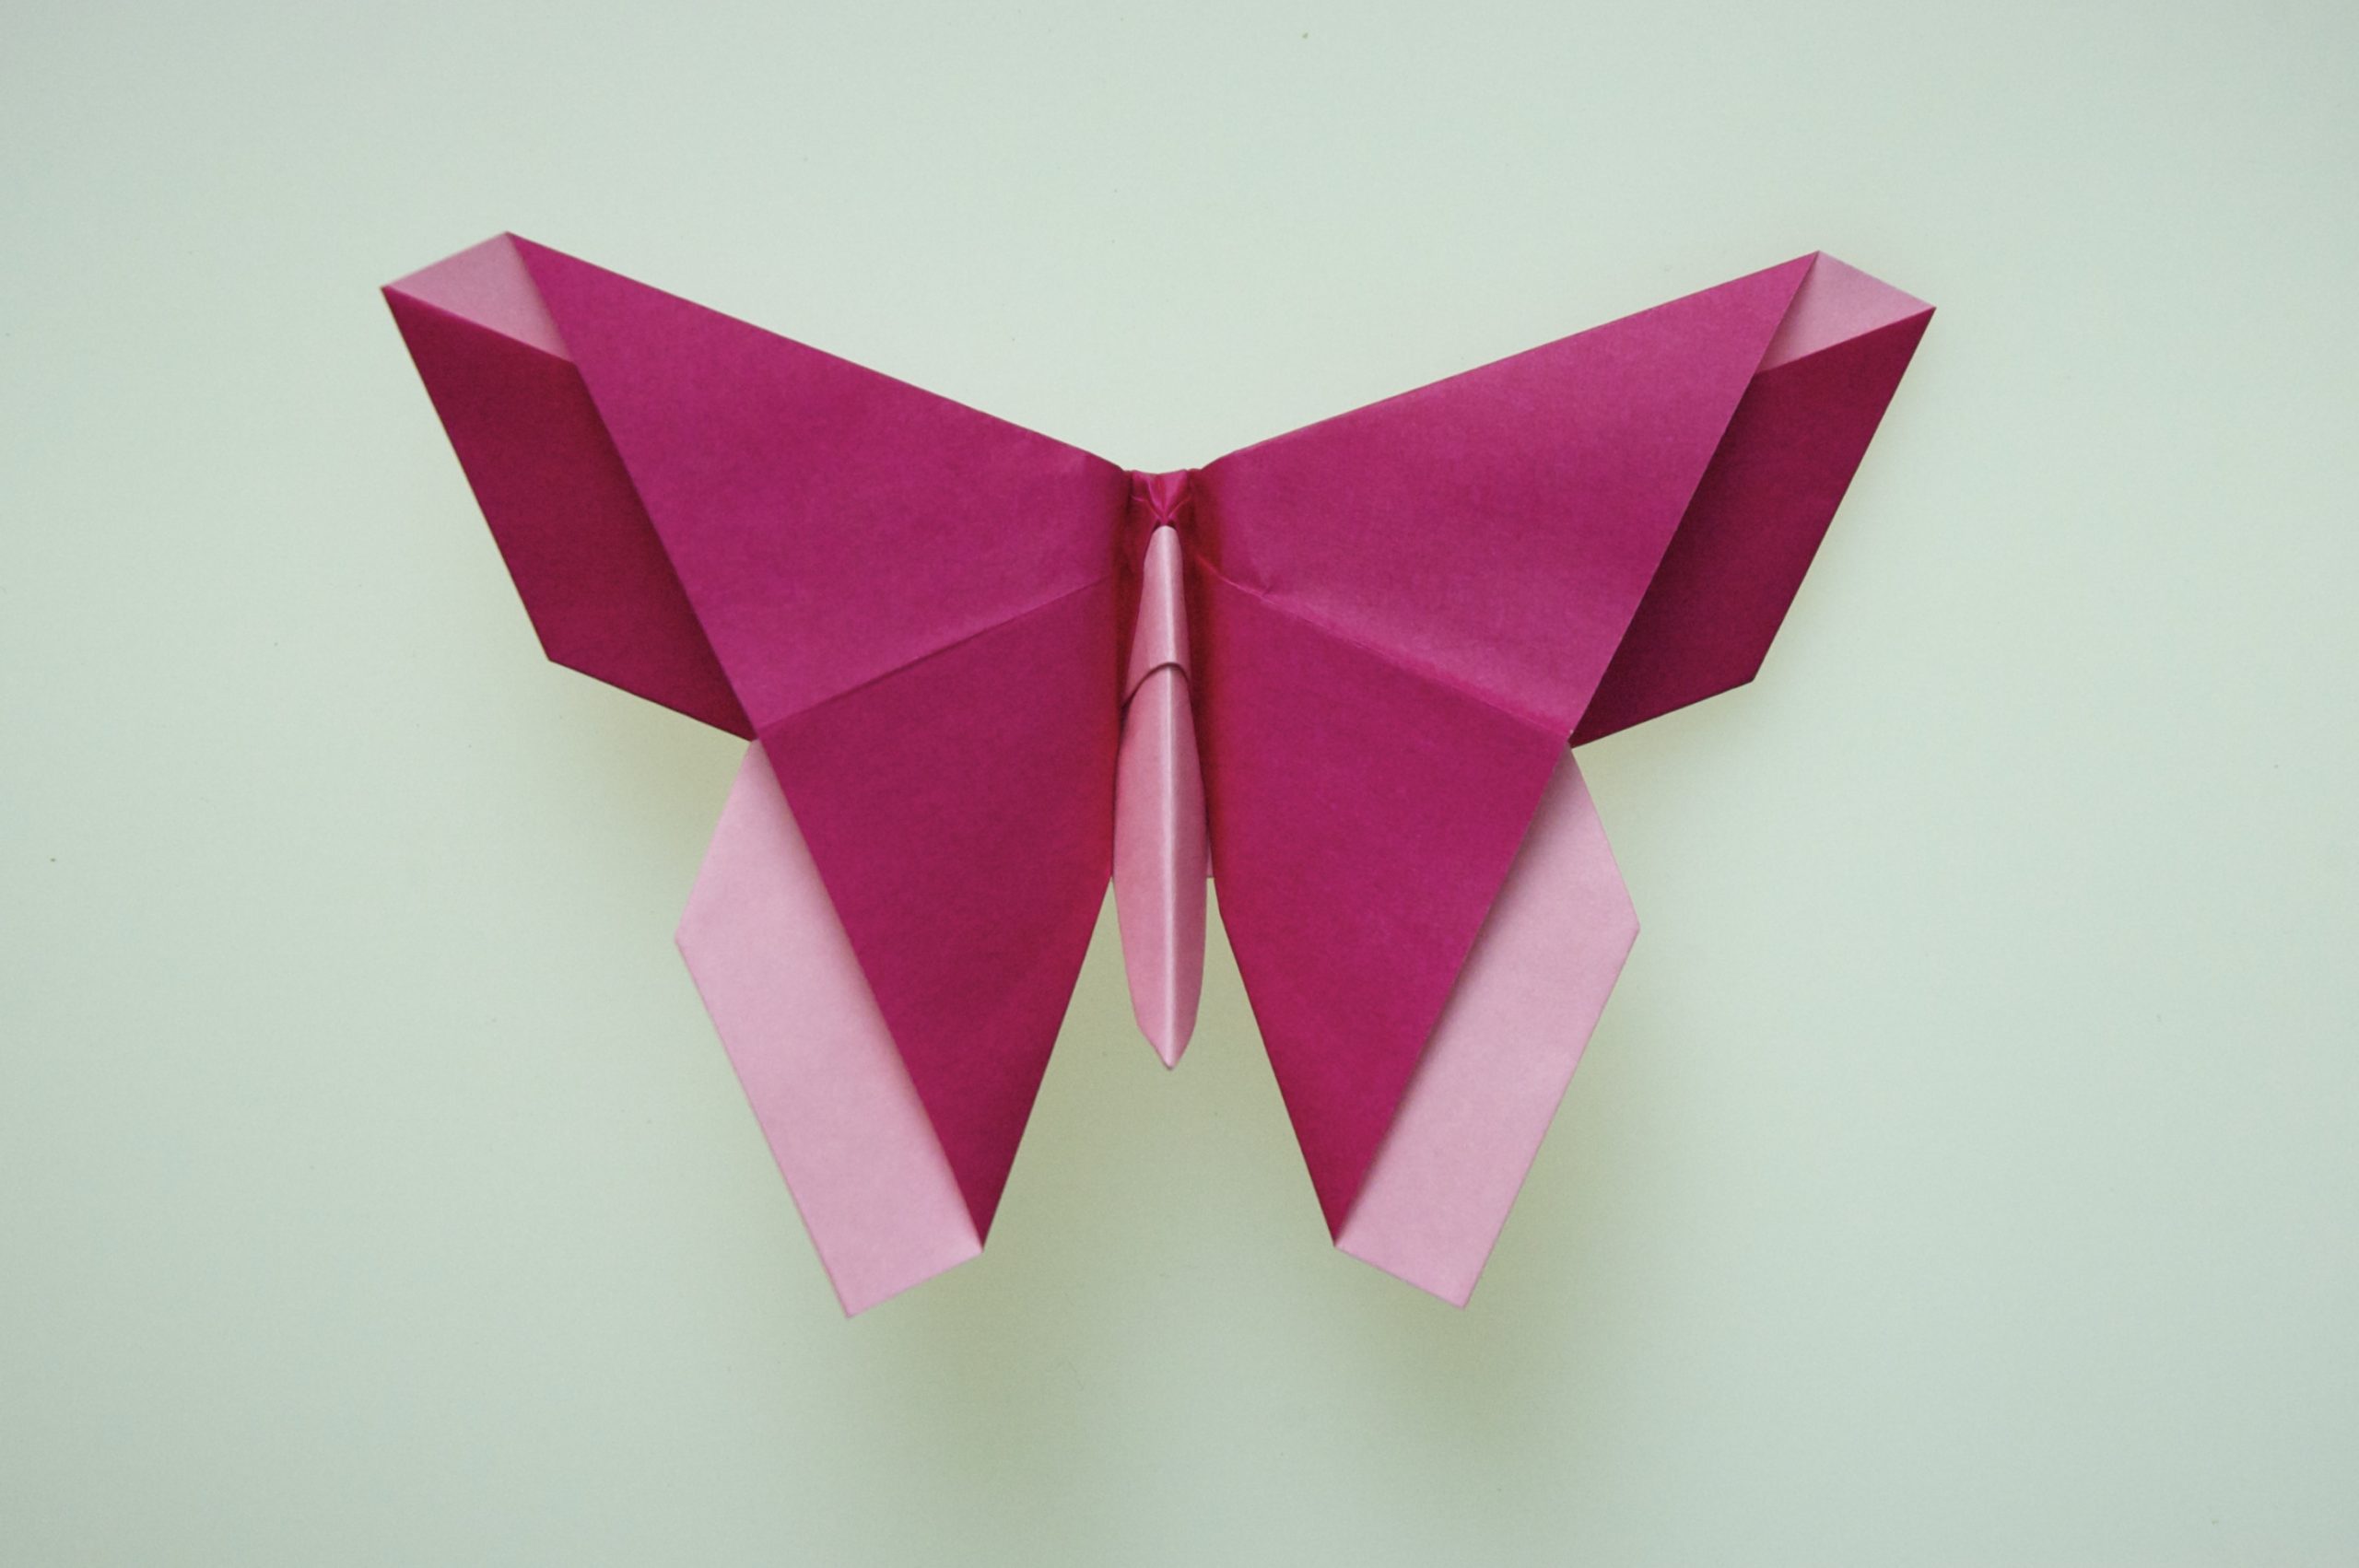 Origami Butterflies Kit: The Lafosse Butterfly Design System - Kit Includes  2 Origami Books, 12 Projects, 98 Origami Papers: Great for Both Kid (Other)